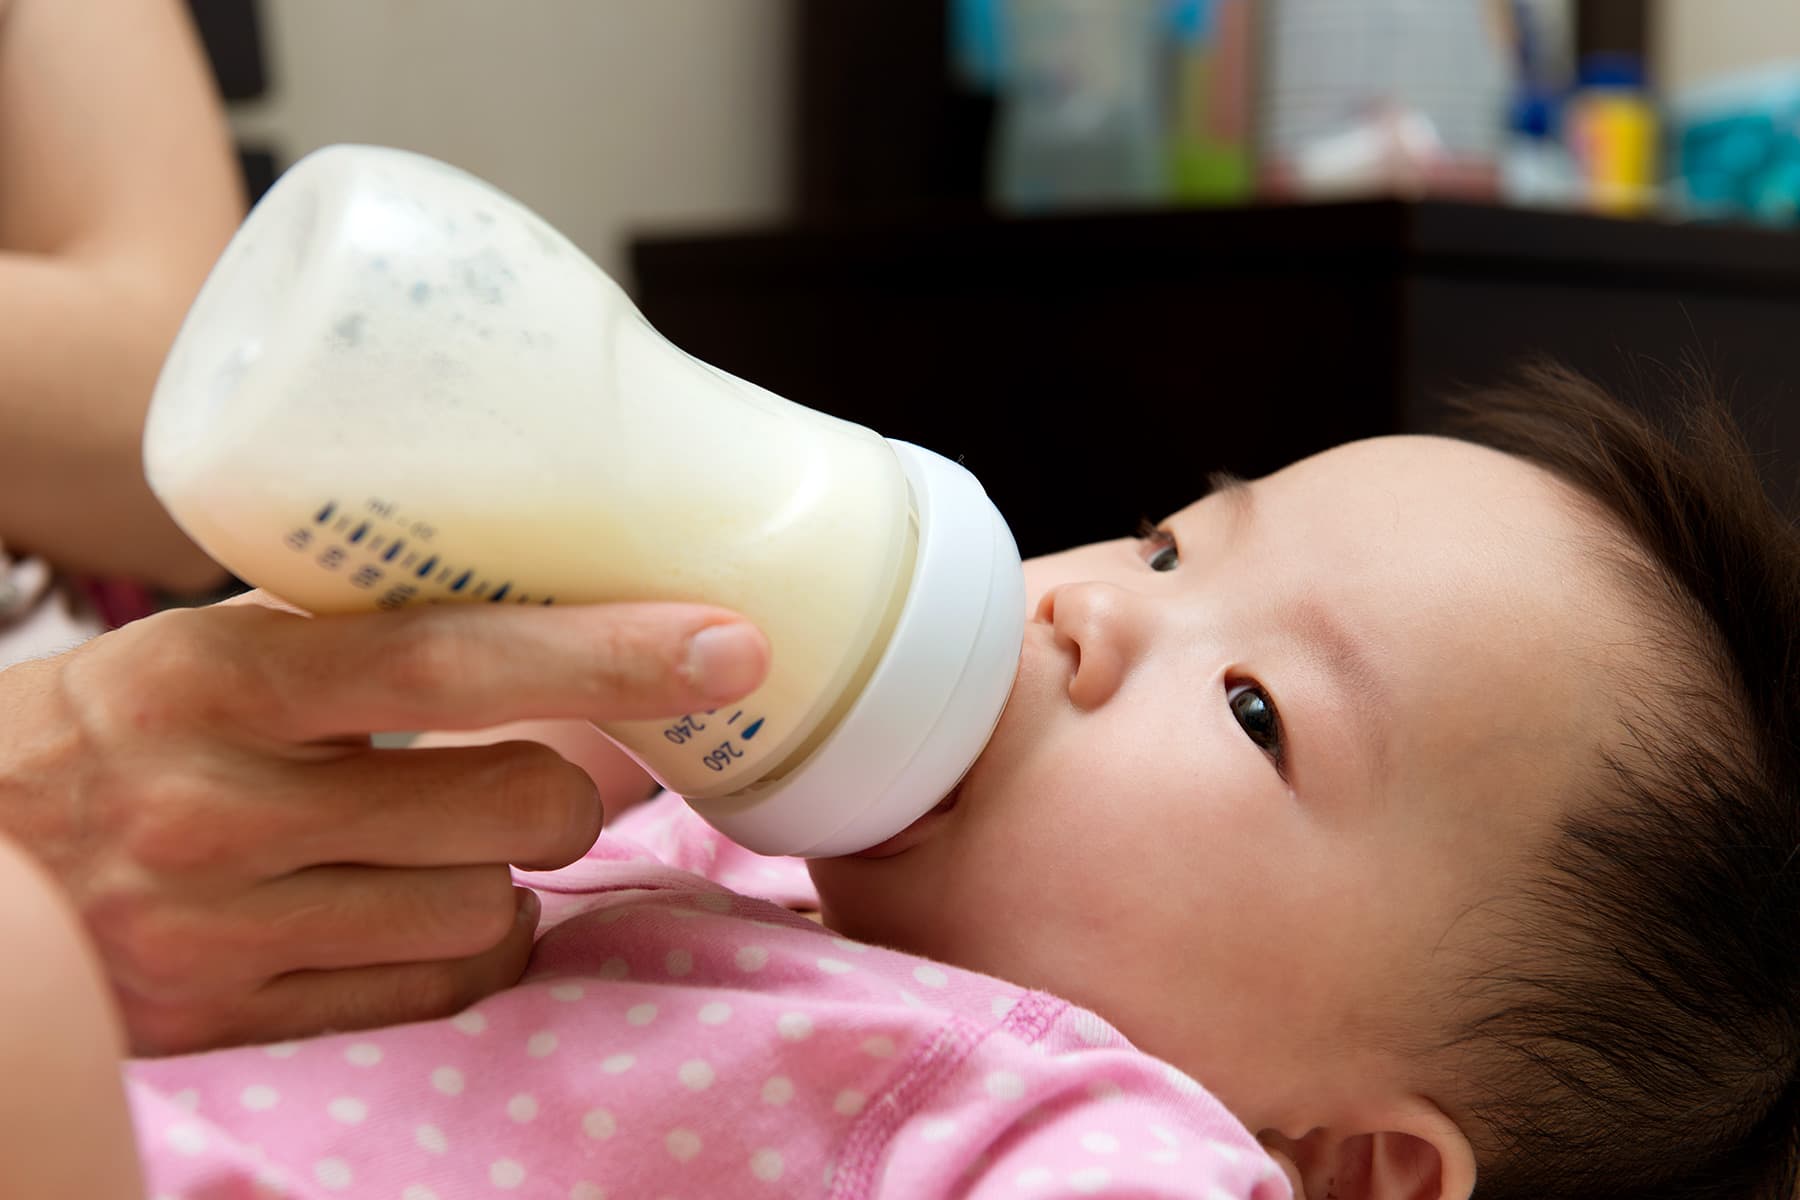 How Often Should I Feed My Baby? Tips for Infant Feeding Schedules